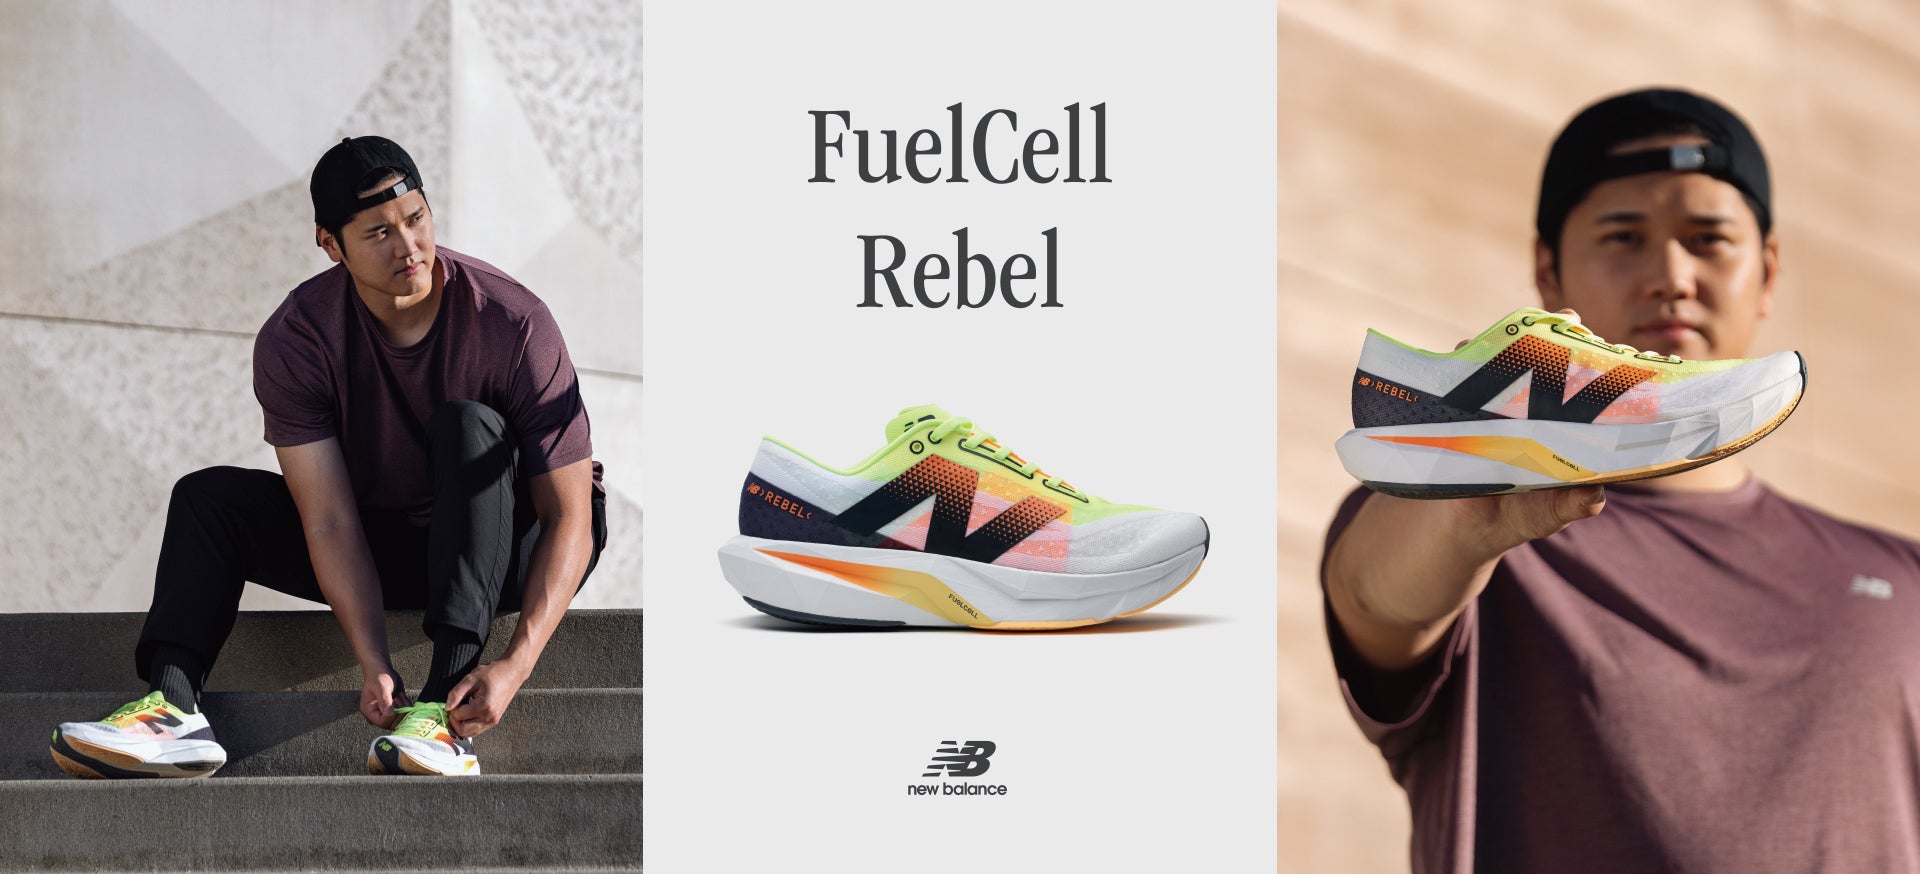 FuelCell Rebel Item worn by Shohei Ohtani.